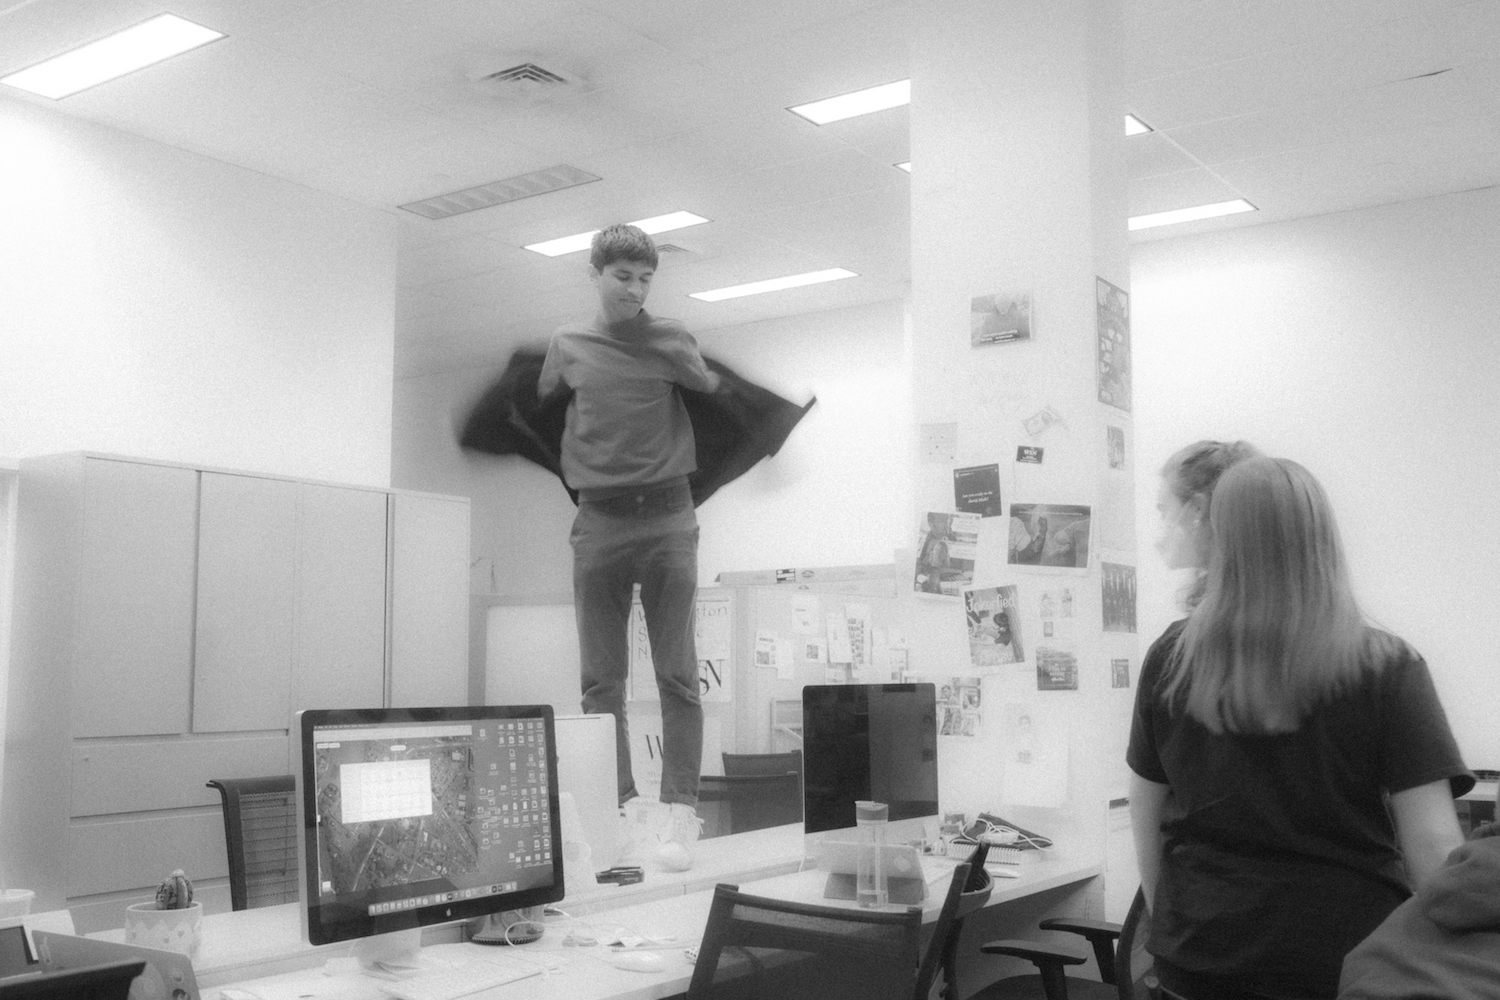 Arnav Binaykia tries to fly while standing on a desk.